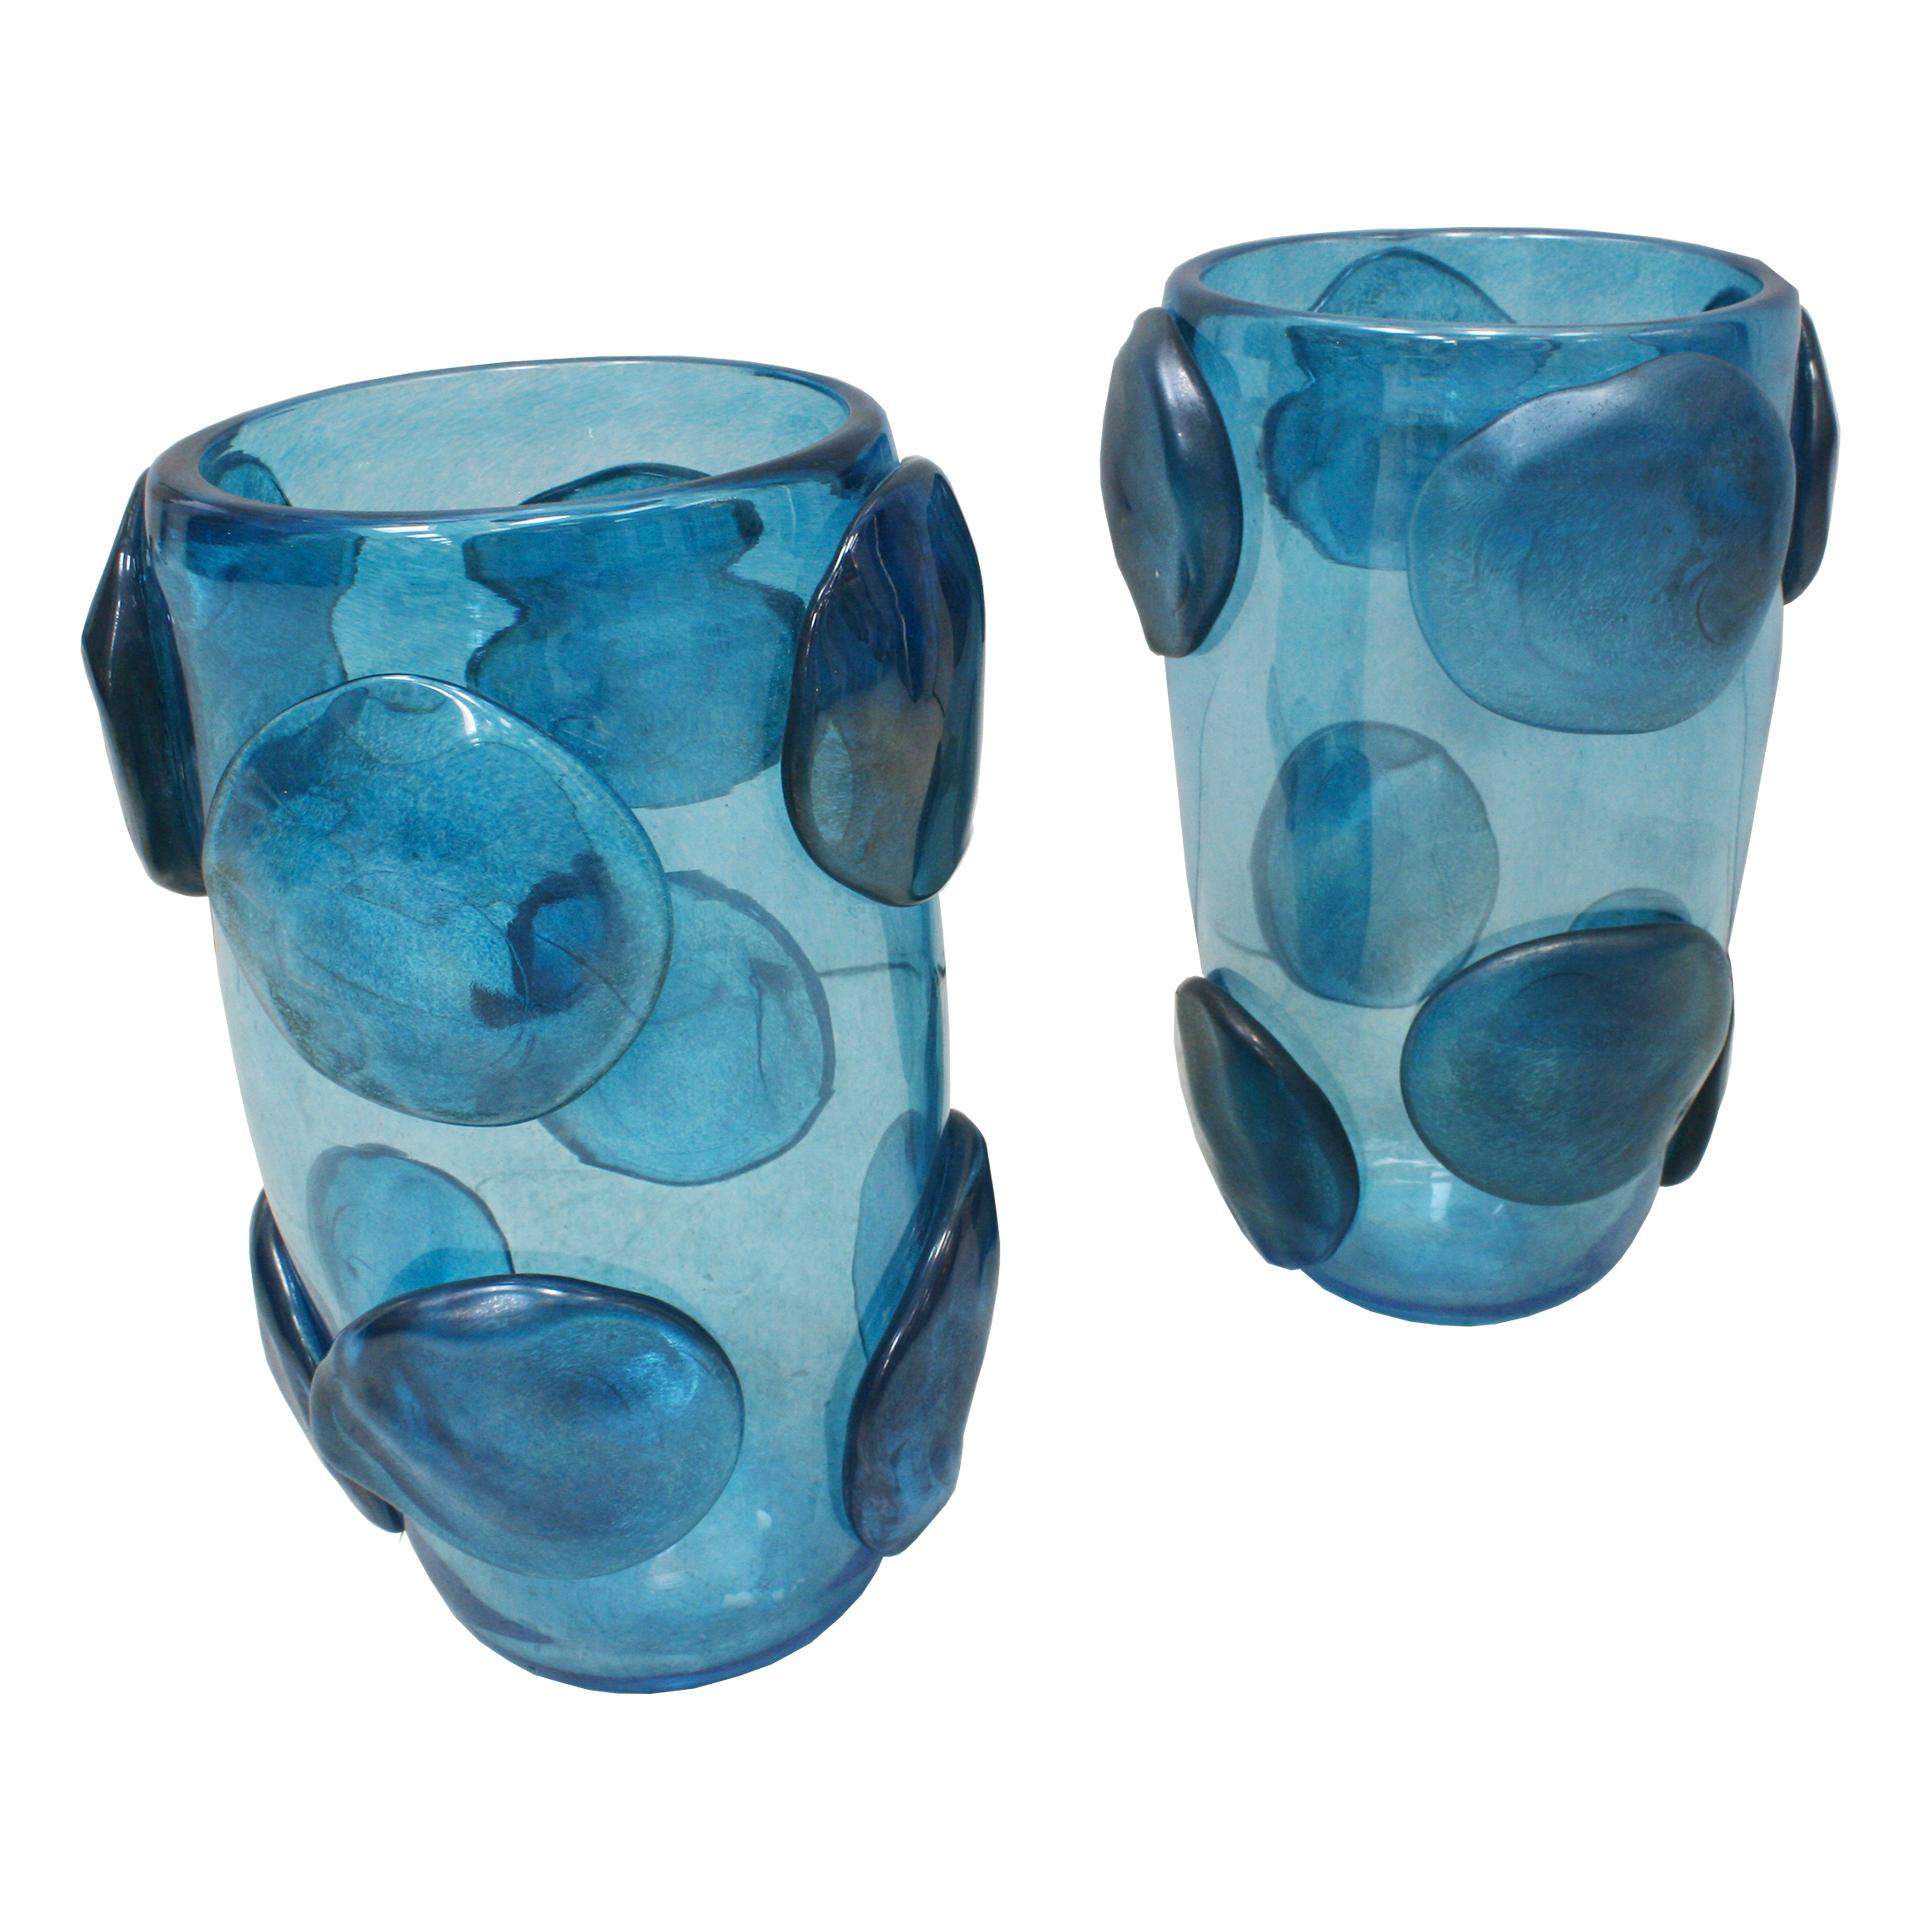 Pair of murano hand blown vases made of opaline glass by the Italian artist glassblower Costantini. The body is decorated with round freeform reliefs.

These exquisite Venetian vases are signed underneath, Italy, 1980s.